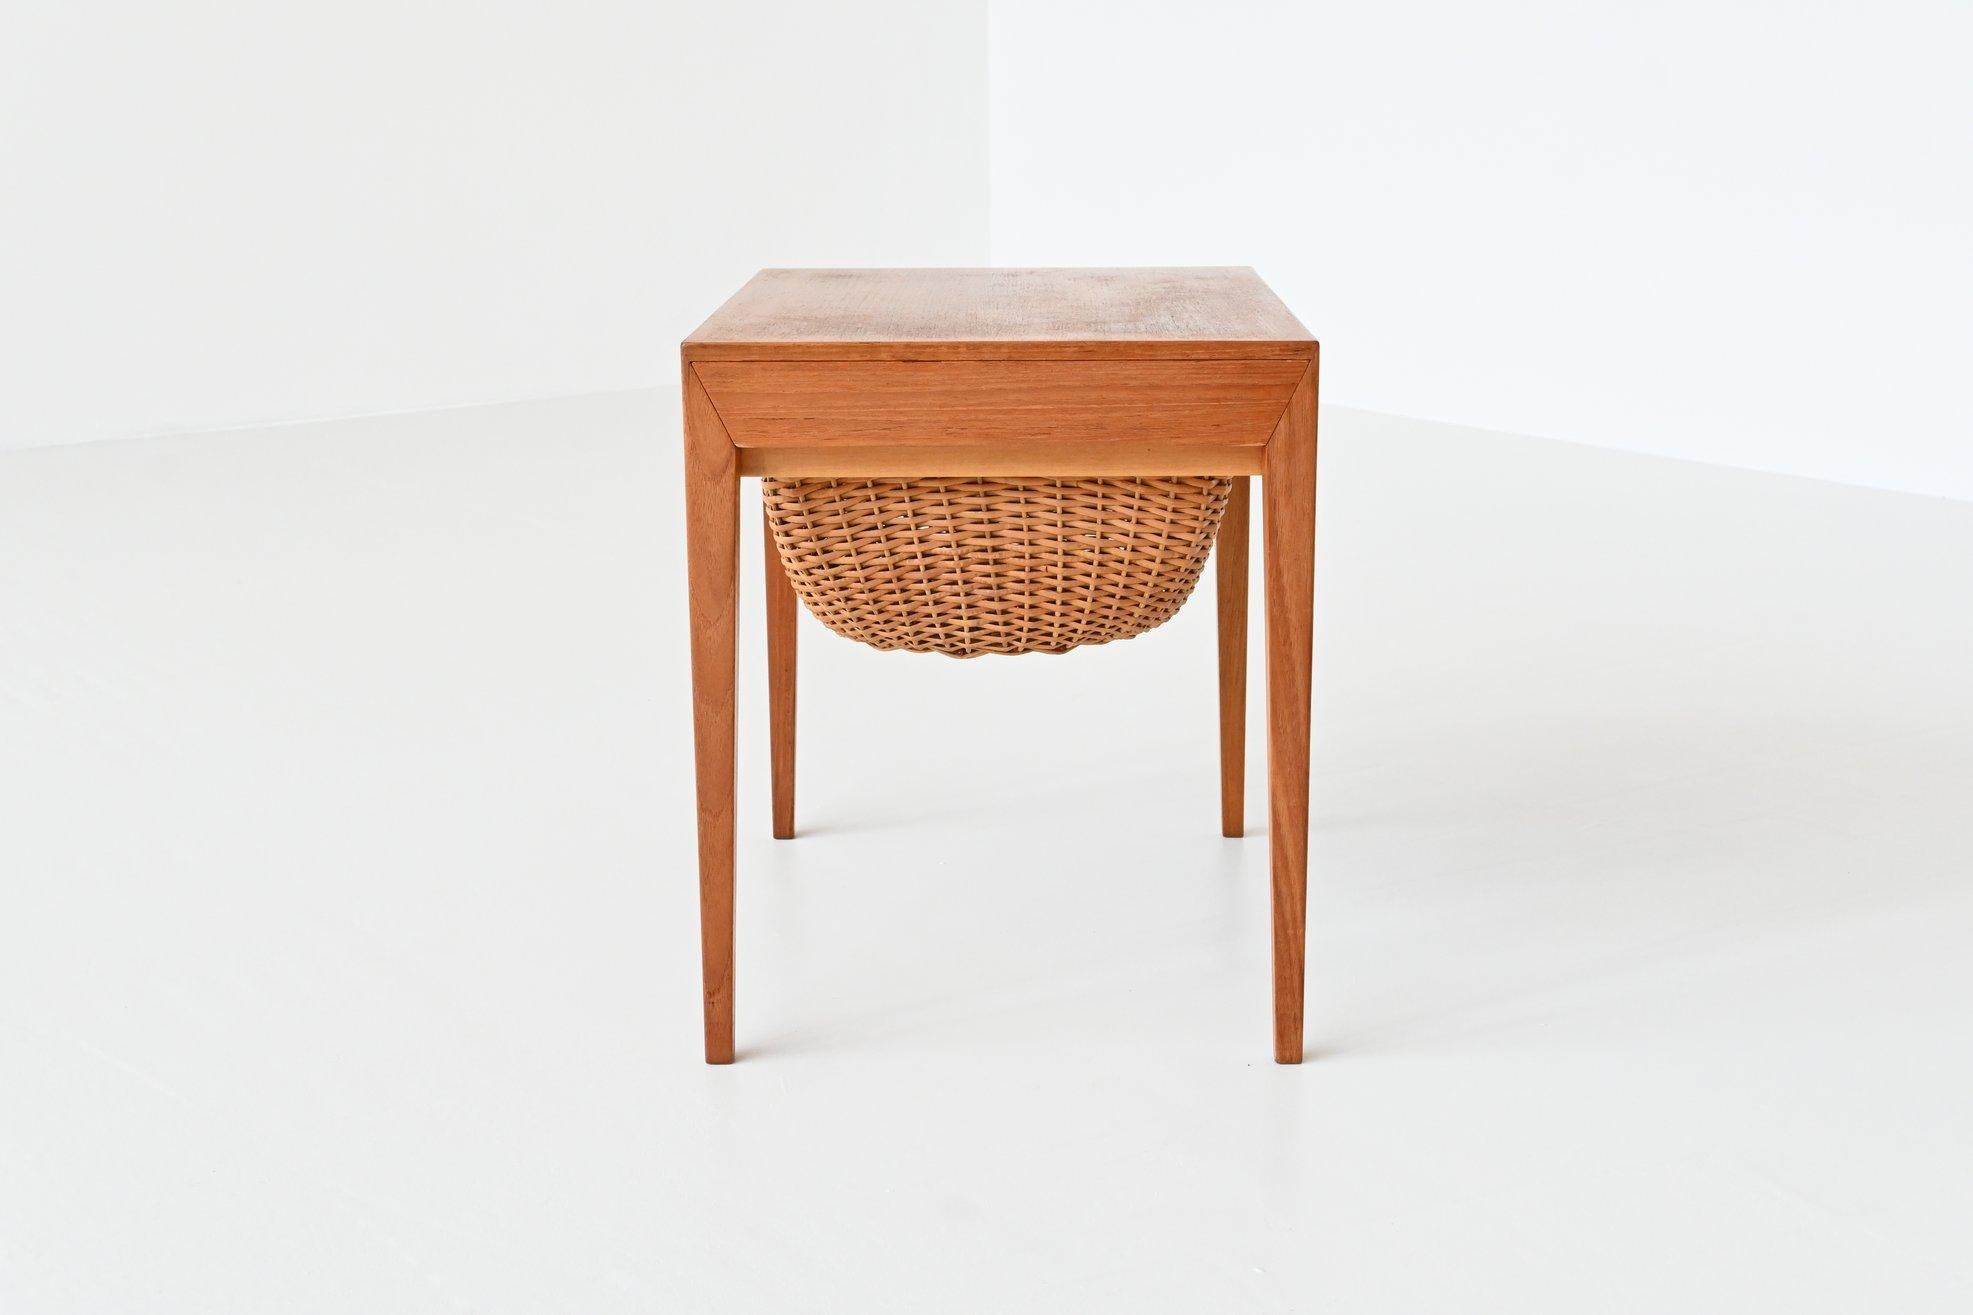 Beautiful sewing table designed by Severin Hansen, manufactured by Haslev Møbelsnedskeri and distributed and sold by Bovenkamp Furniture, Denmark 1960. This table is made of high quality teak wood with underneath the top a wicker basket for wool and